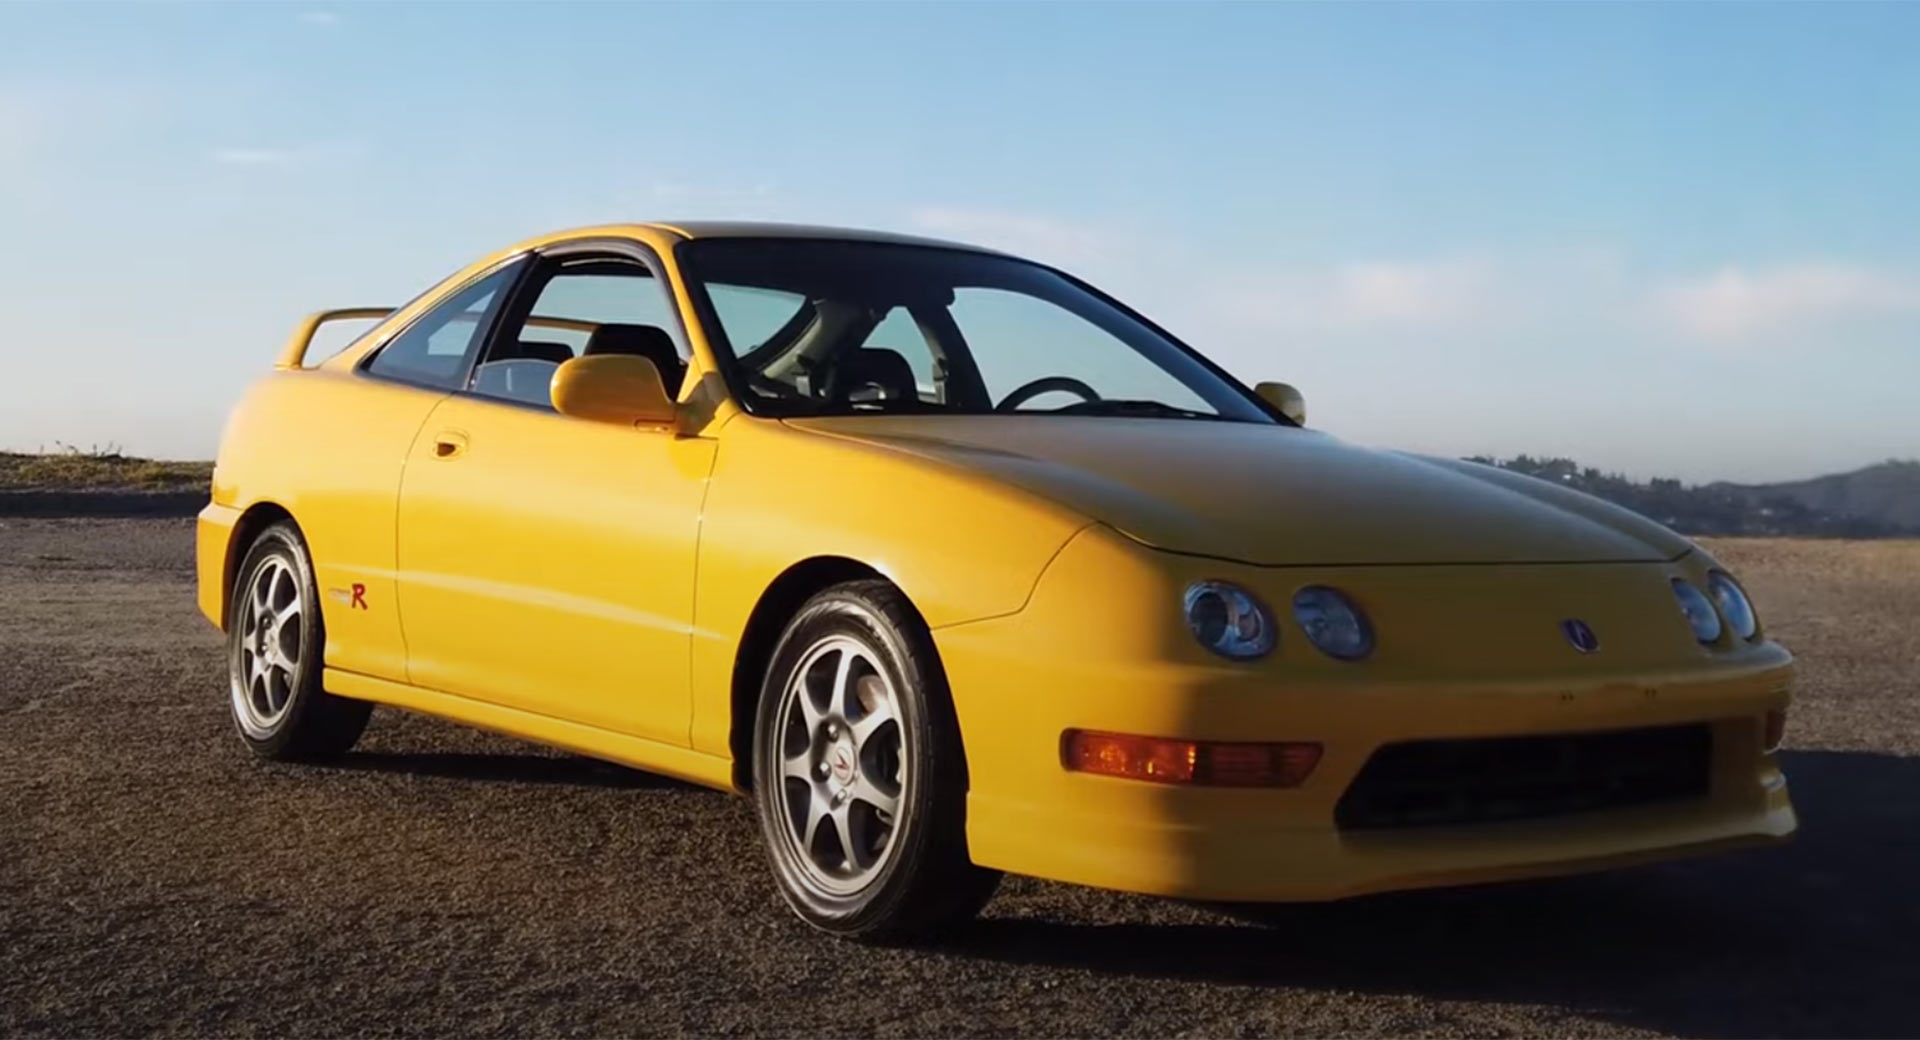 Just What Makes The Acura Integra Type R So Special? | Carscoops